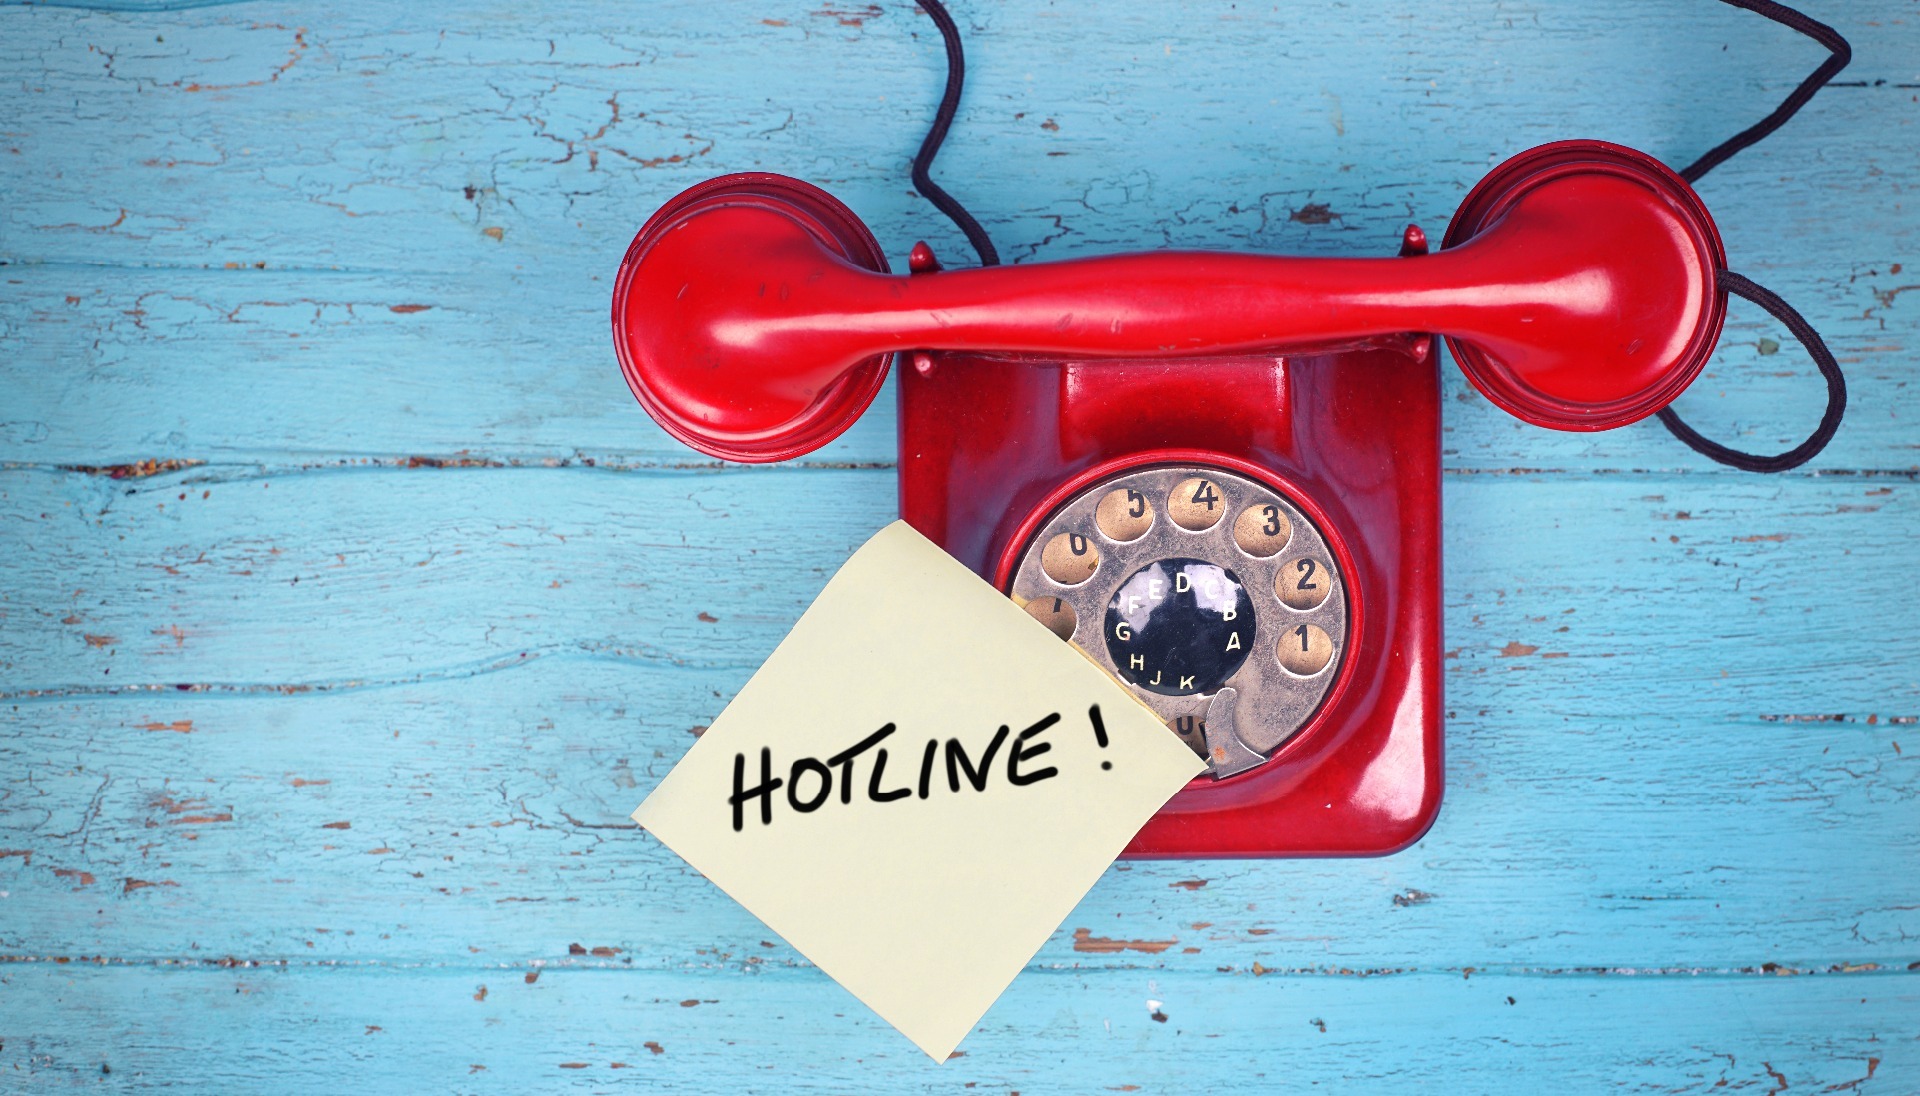 A red, dial-up old-fashioned telephone, with 'Hotline' written on a yellow sticky note, stuck to the 'phone.